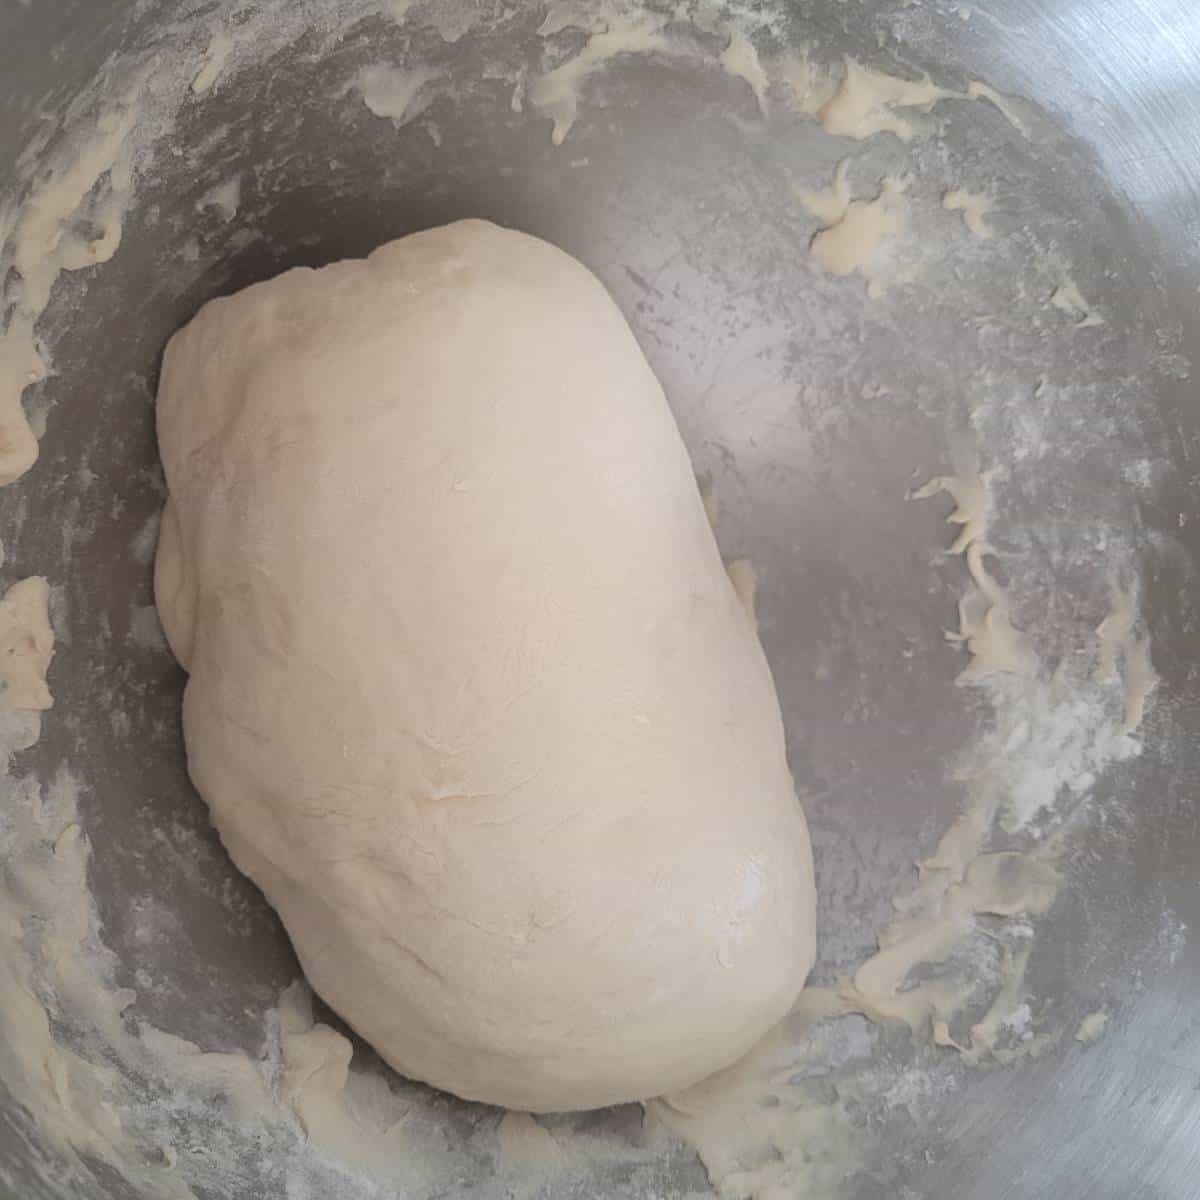 A soft, elastic and non-sticky dough to make a white bread without salt.